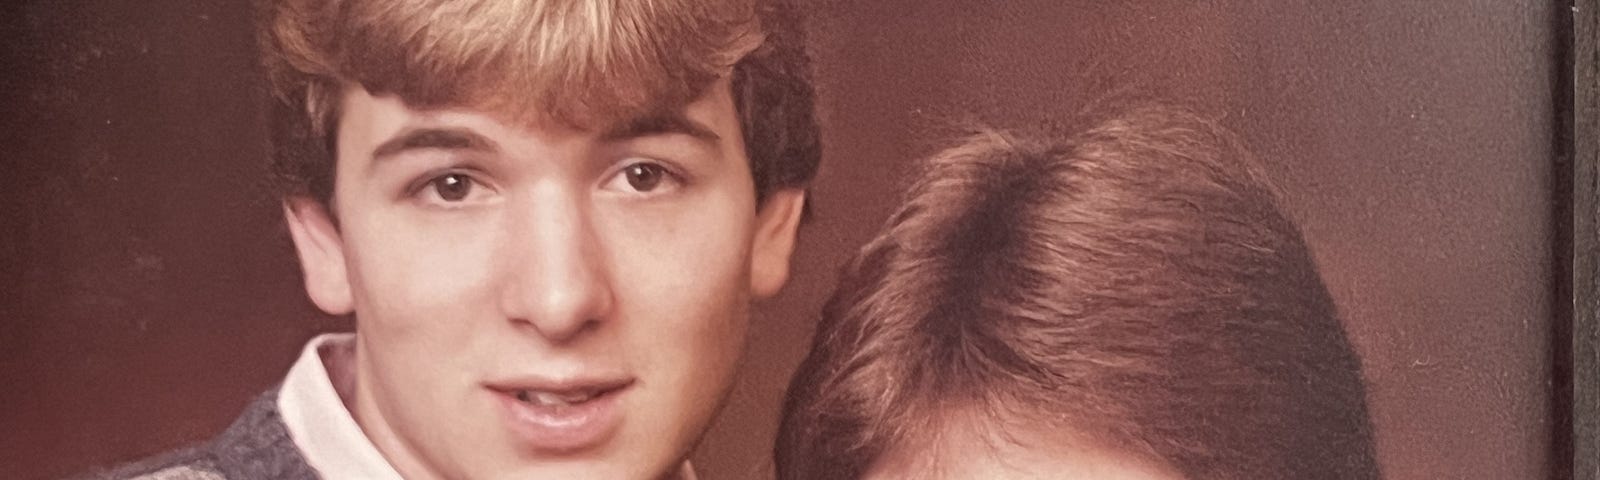 I know this looks like the Stepbrother movie poster — but this was years earlier … and I promise we are real brothers!